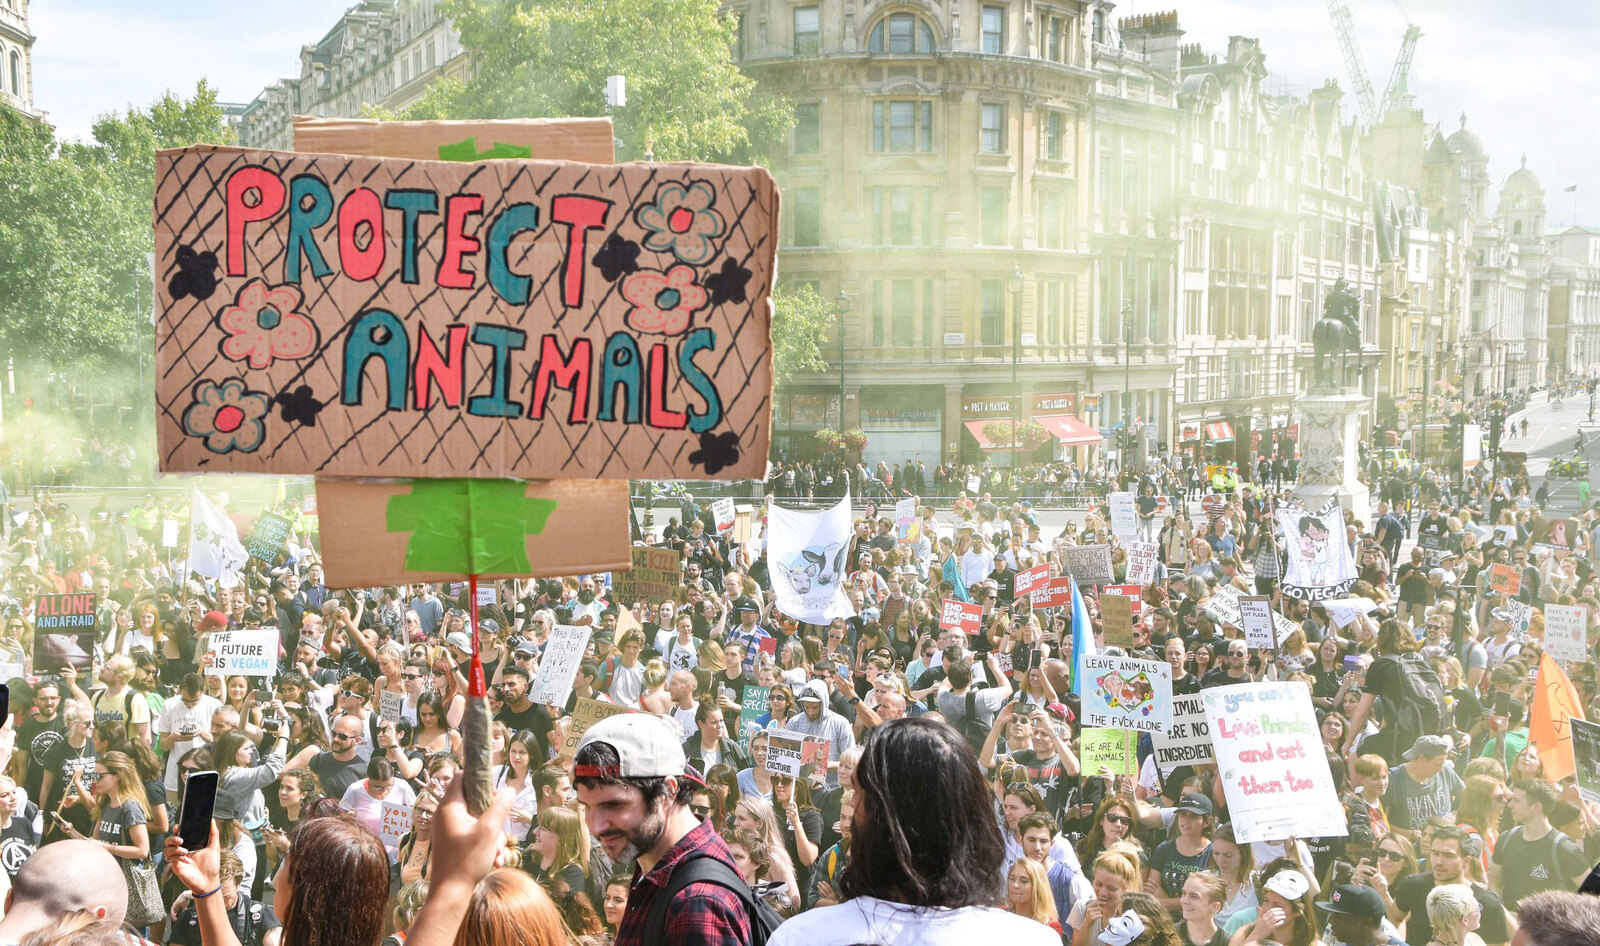 Record 12,000 Vegan Activists March for Animal Rights in London